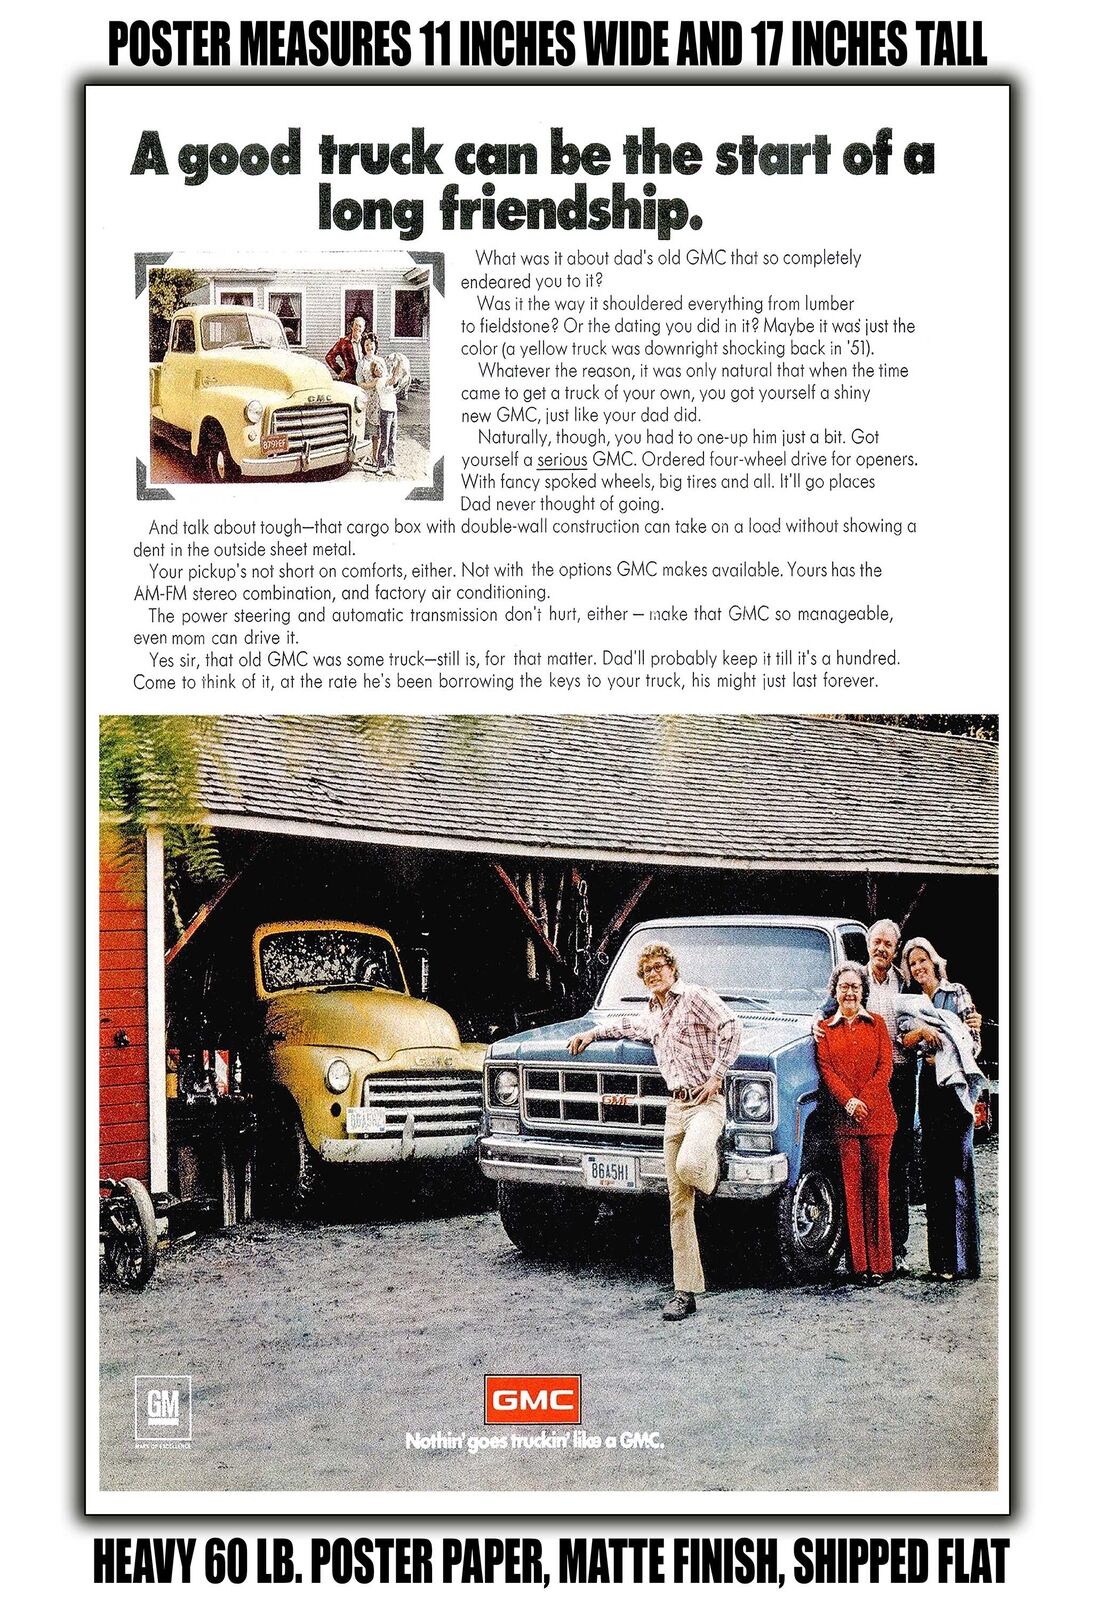 11x17 POSTER - 1978 GMC: A Good Truck Can Be the Start of a Long Friendship